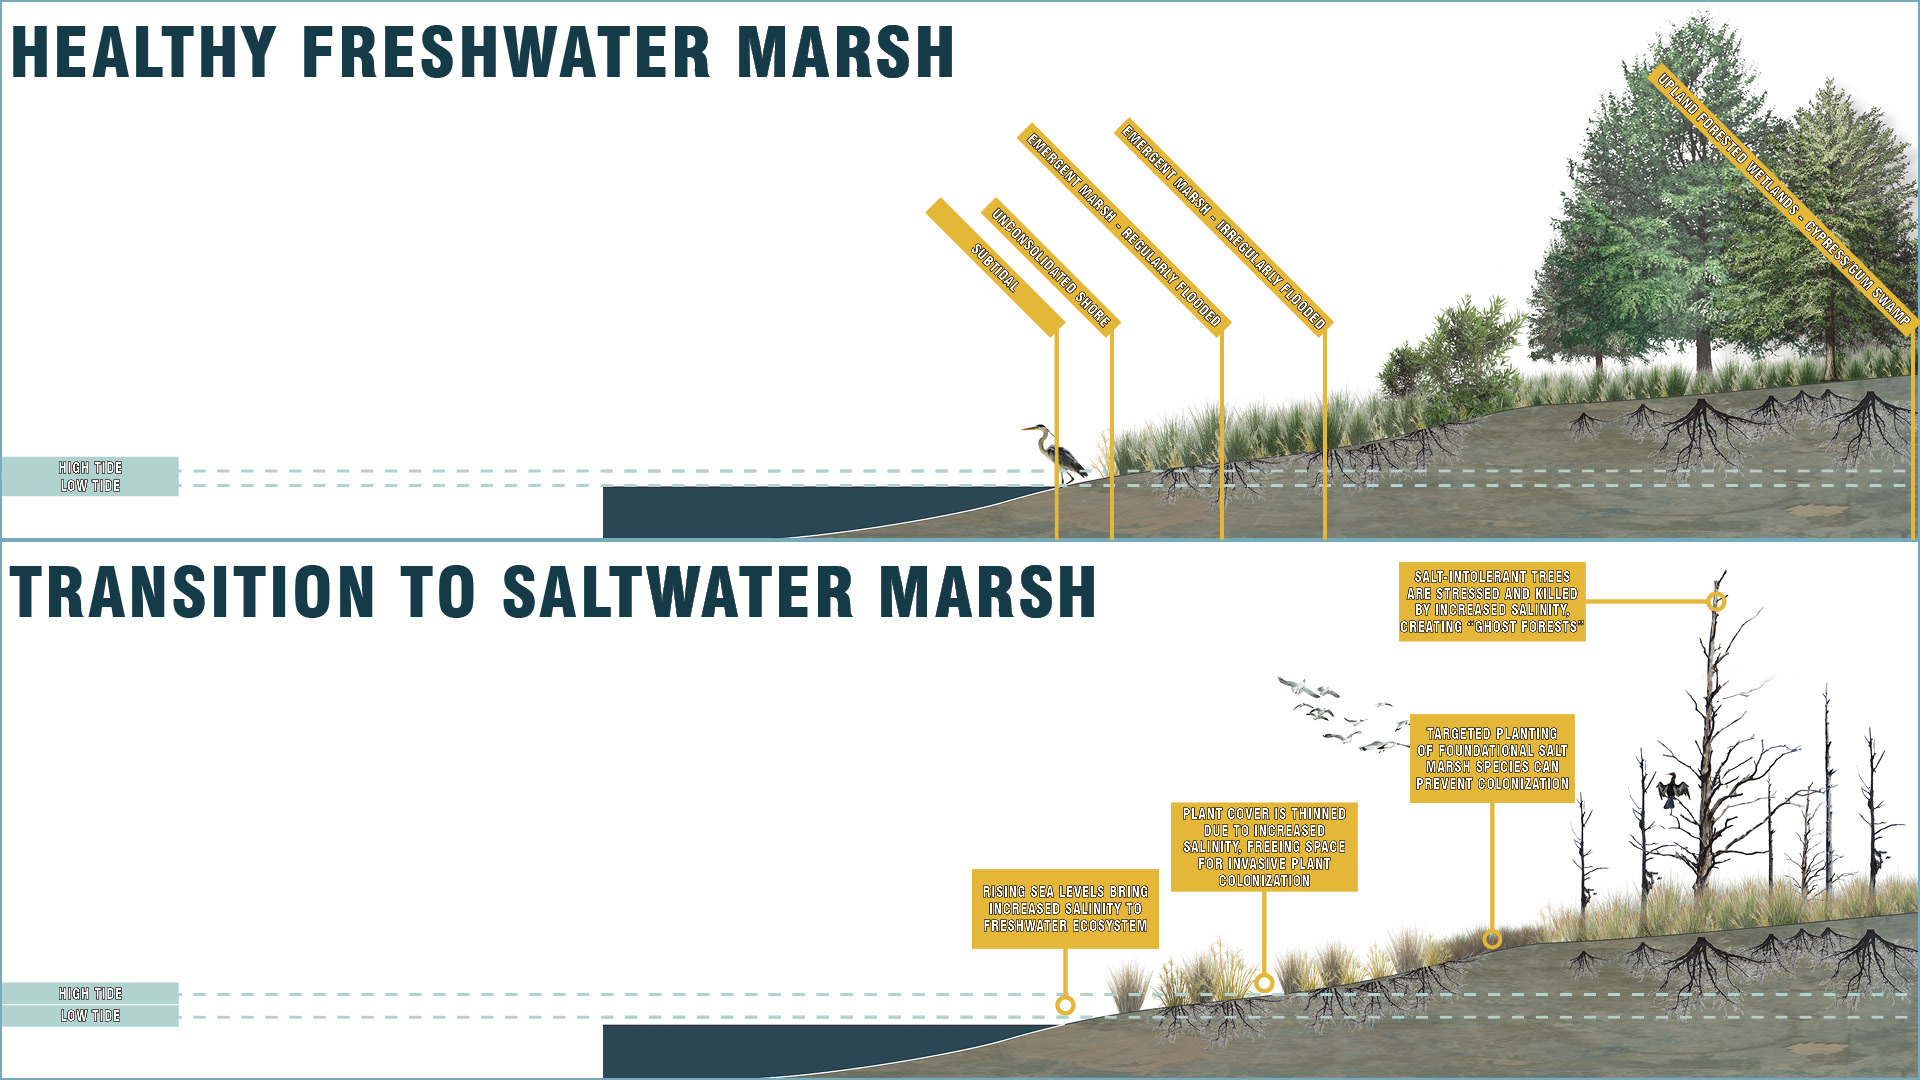 Supporting the Transition to Saltwater Marsh